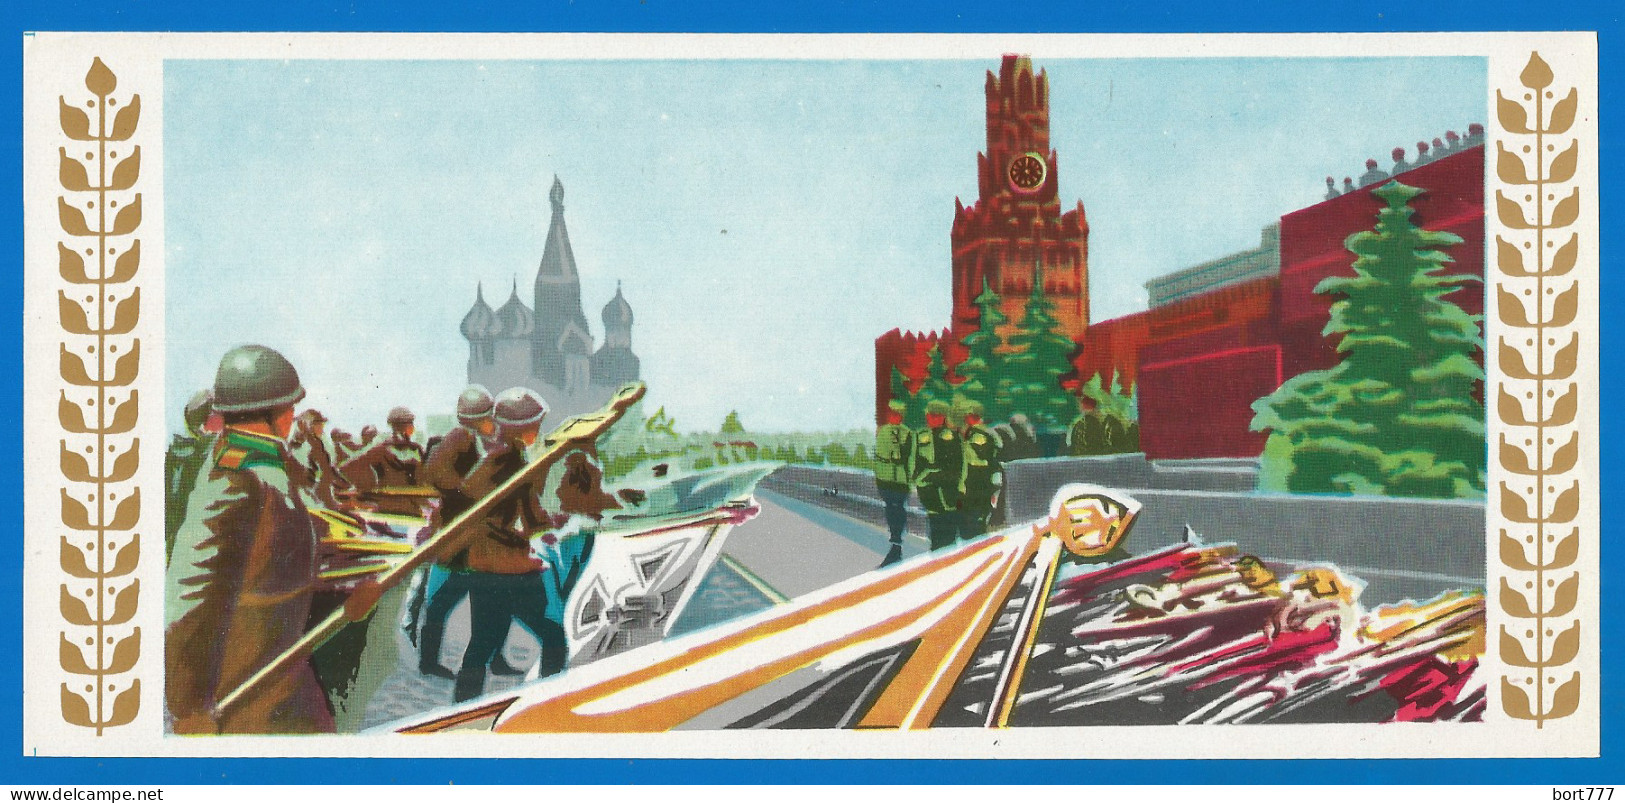 RUSSIA 1975 GROSS Matchbox Label -30 Years Of The Victory (catalog #290) - Matchbox Labels